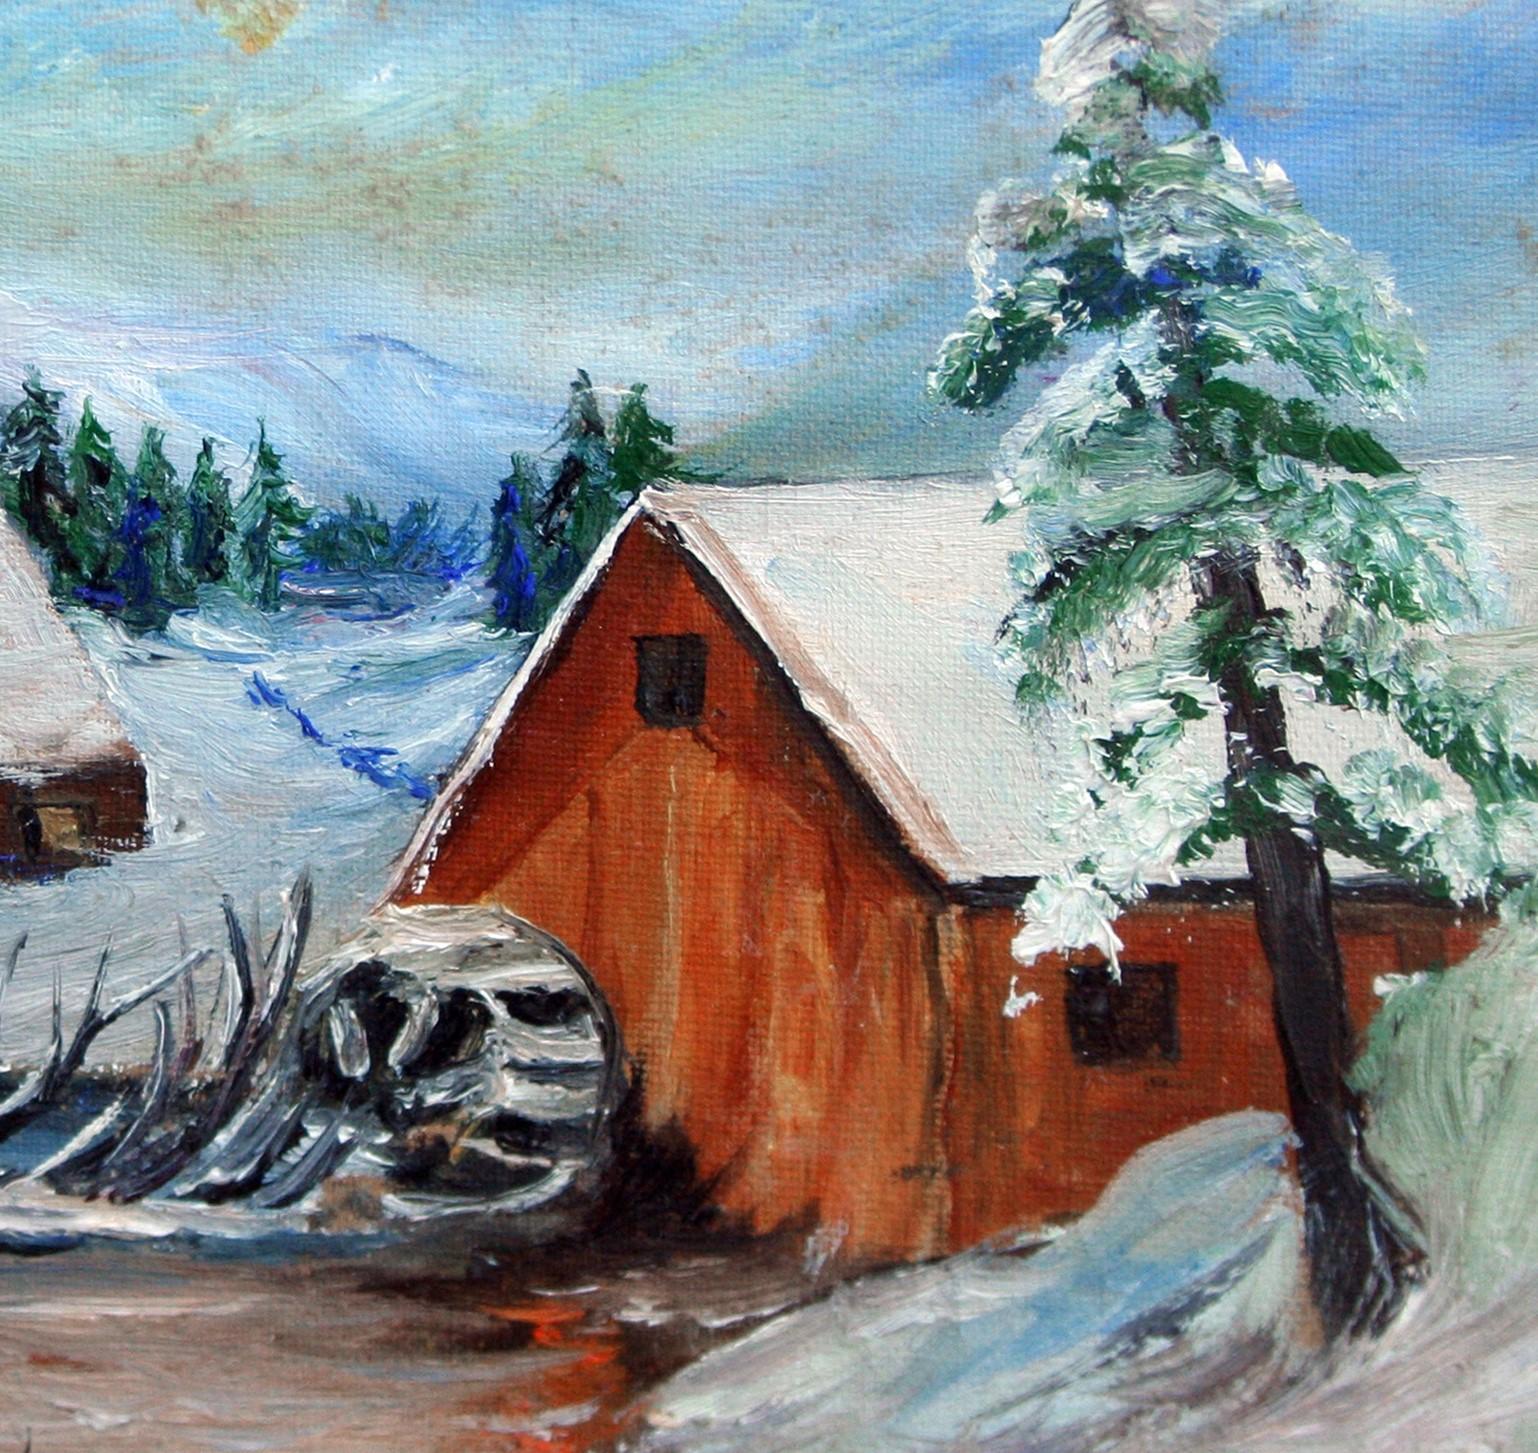 Grist Mill in the Snow - Winter Landscape - Gray Landscape Painting by Unknown